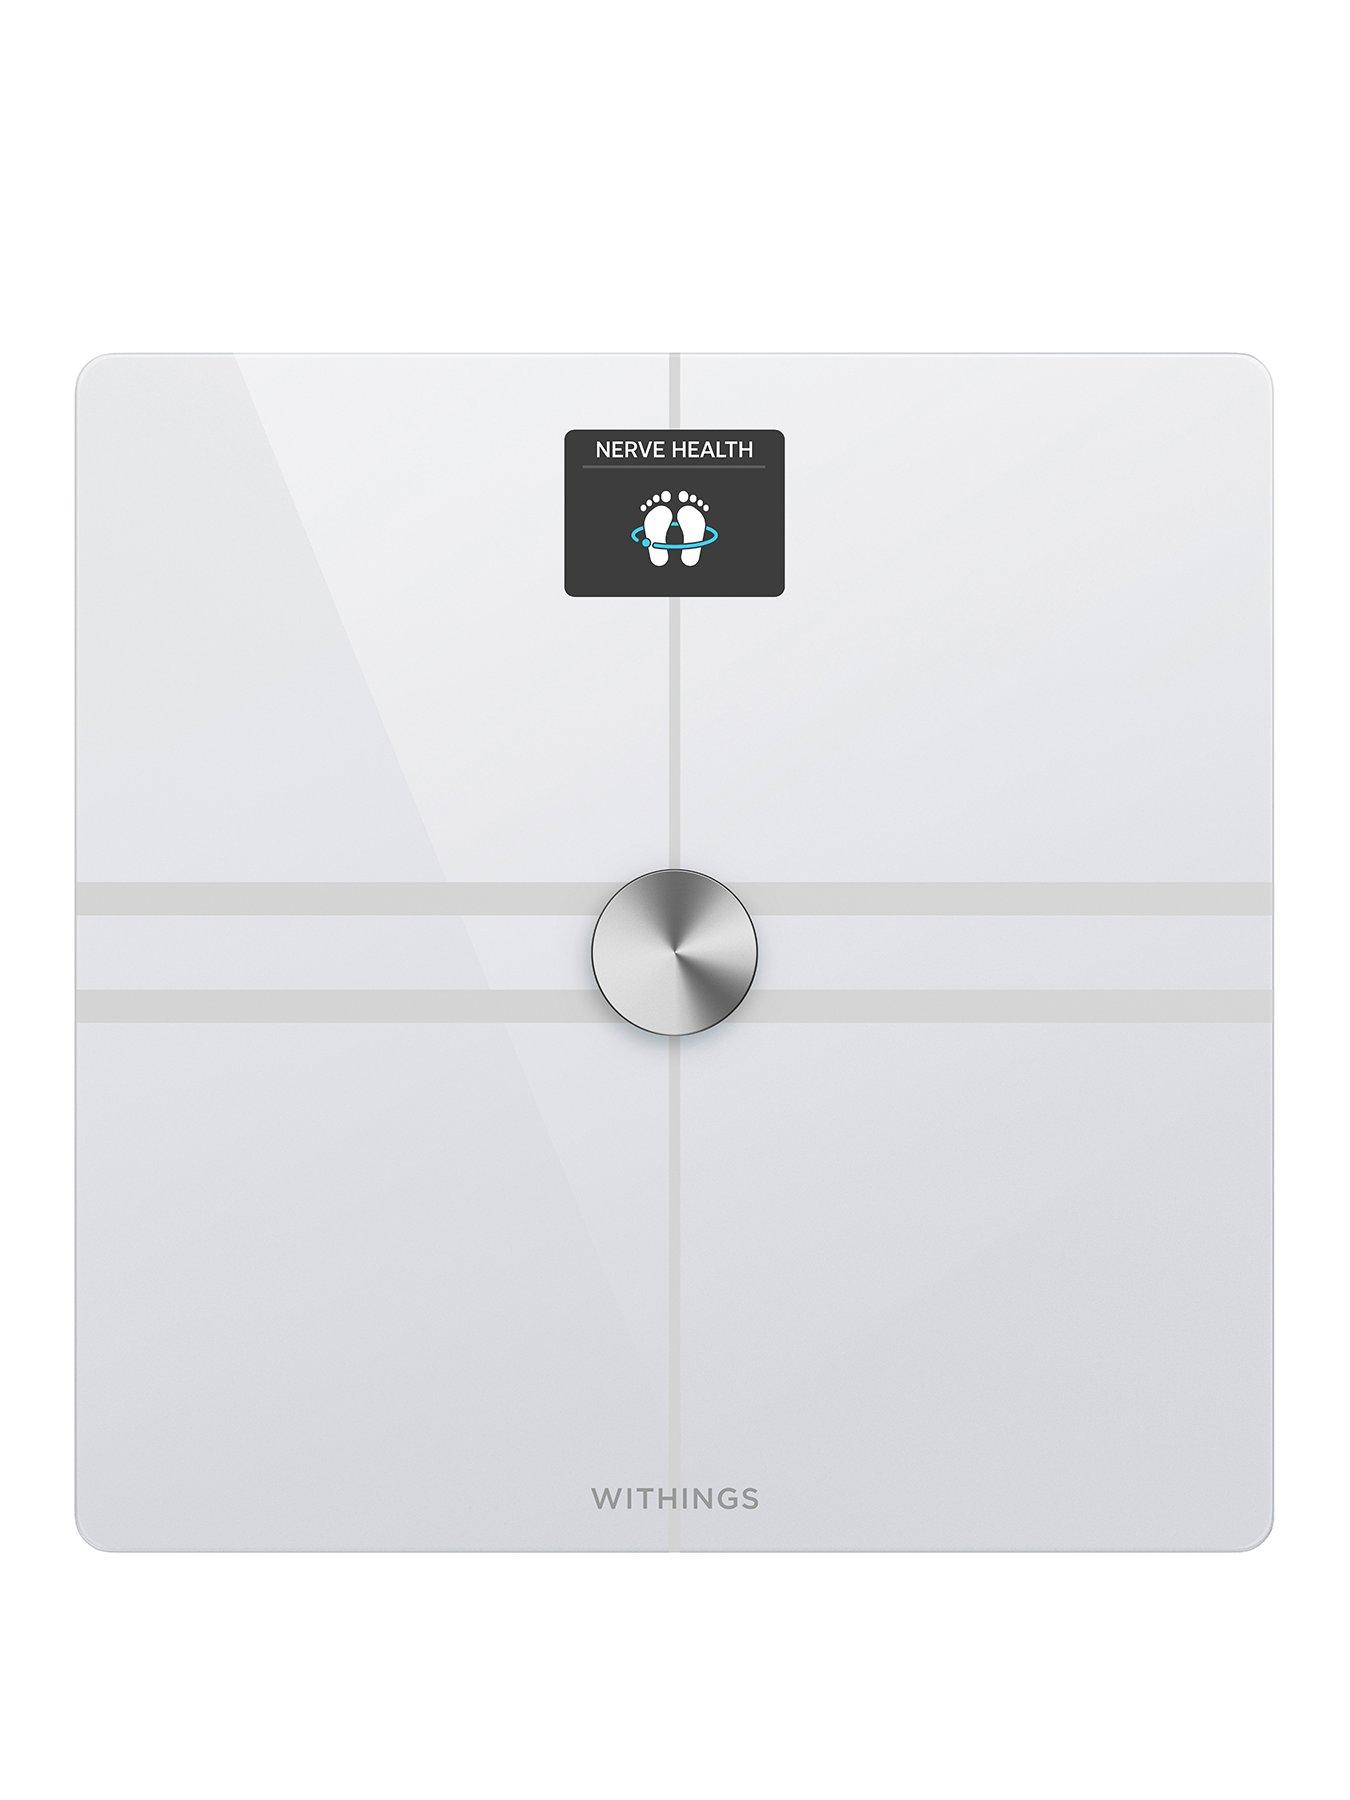 Withings - Body+ Body Composition Smart Wi-Fi Scale - Black